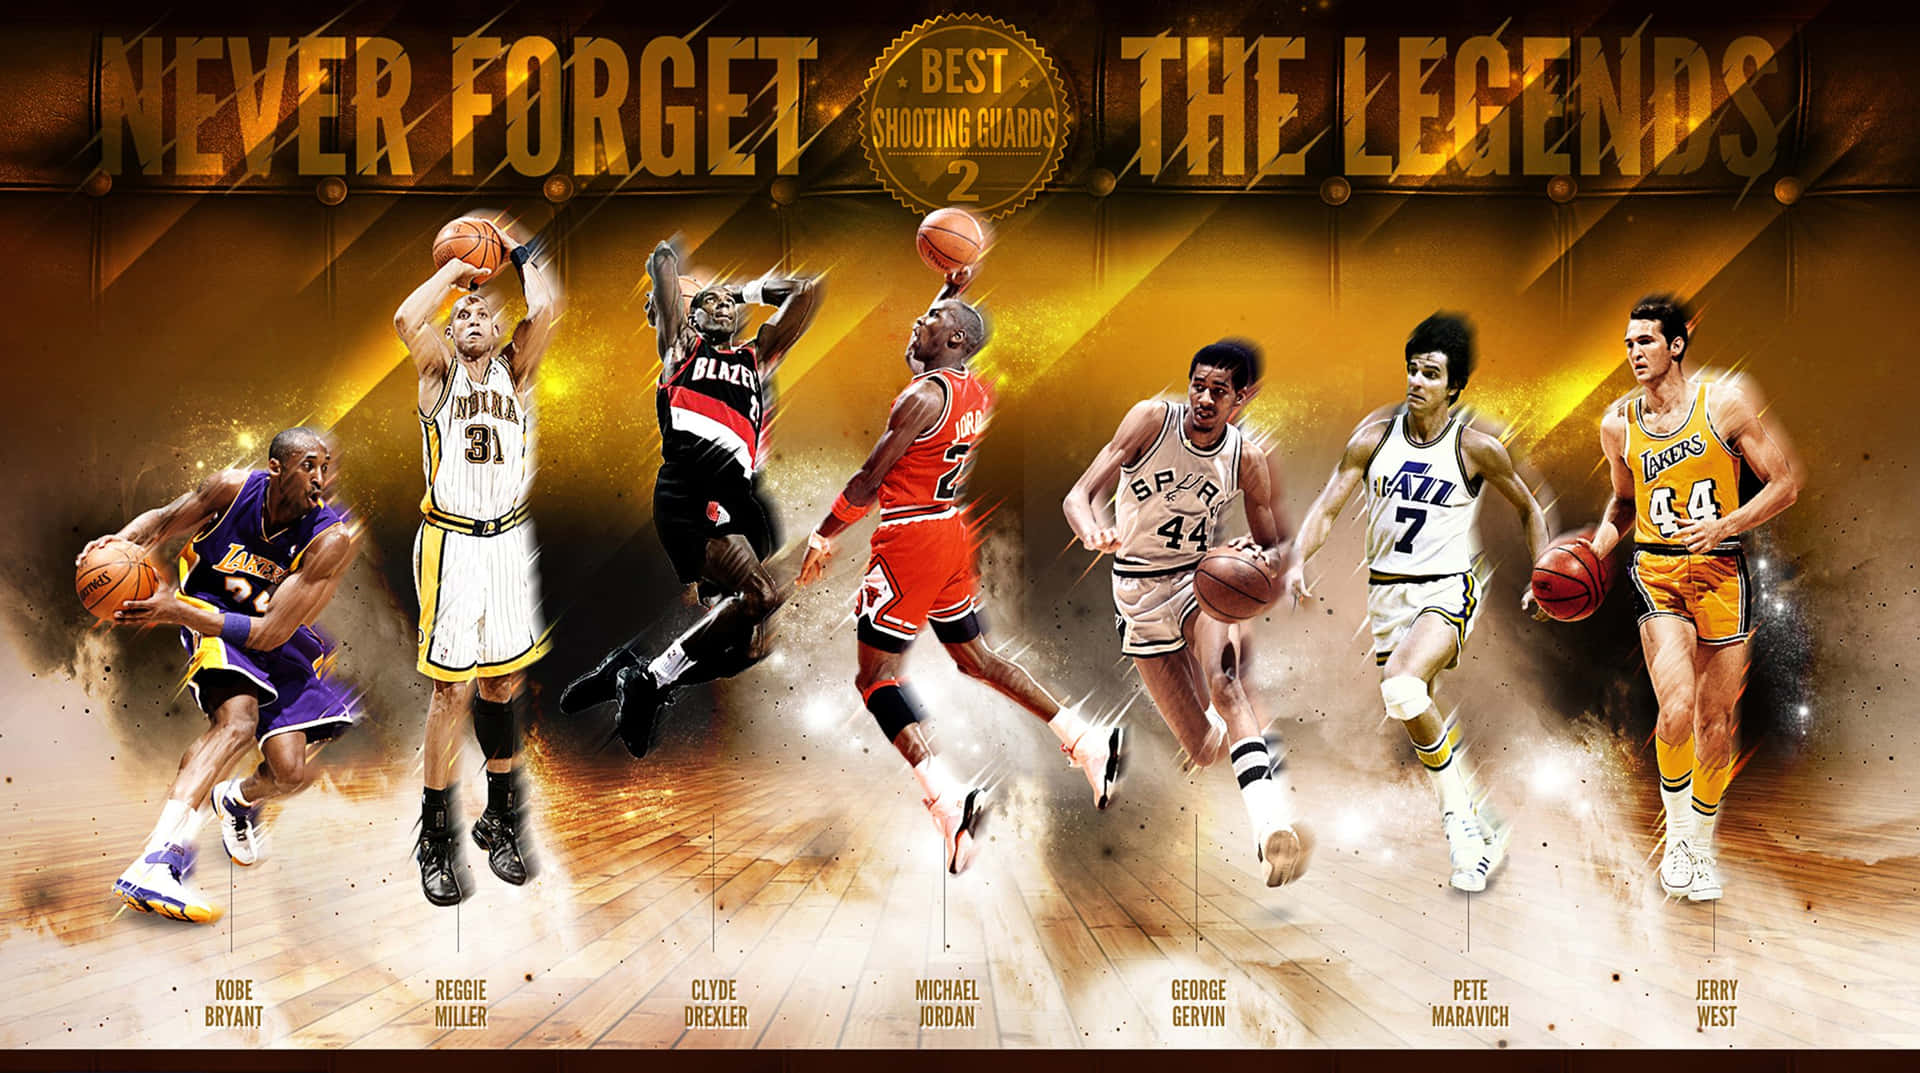 Nba Players In A Poster With The Words Never Forget The Legends Background